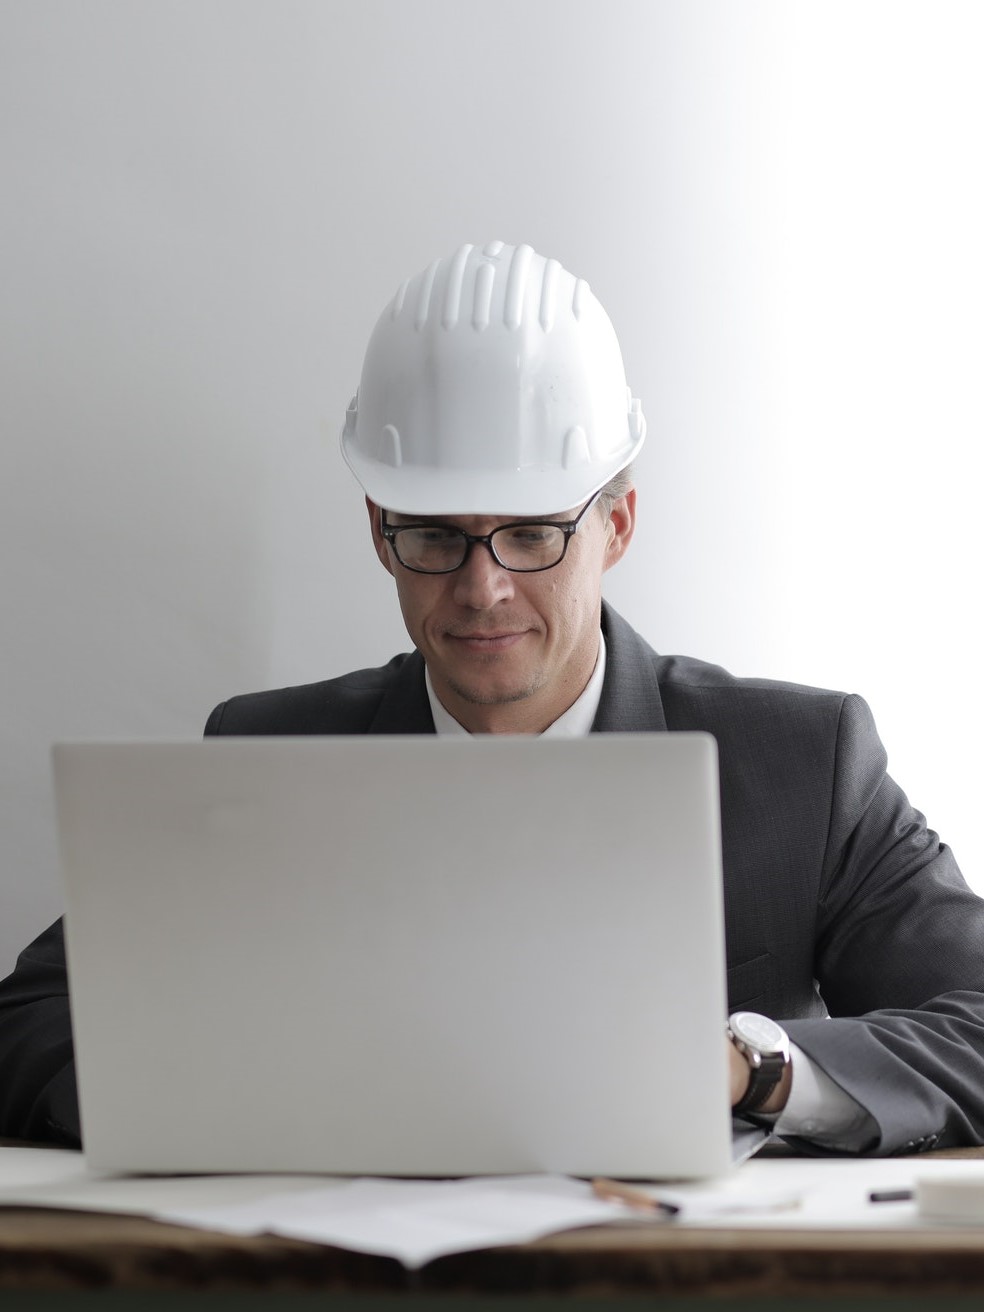 Engineer sitting at desk with hard hat on